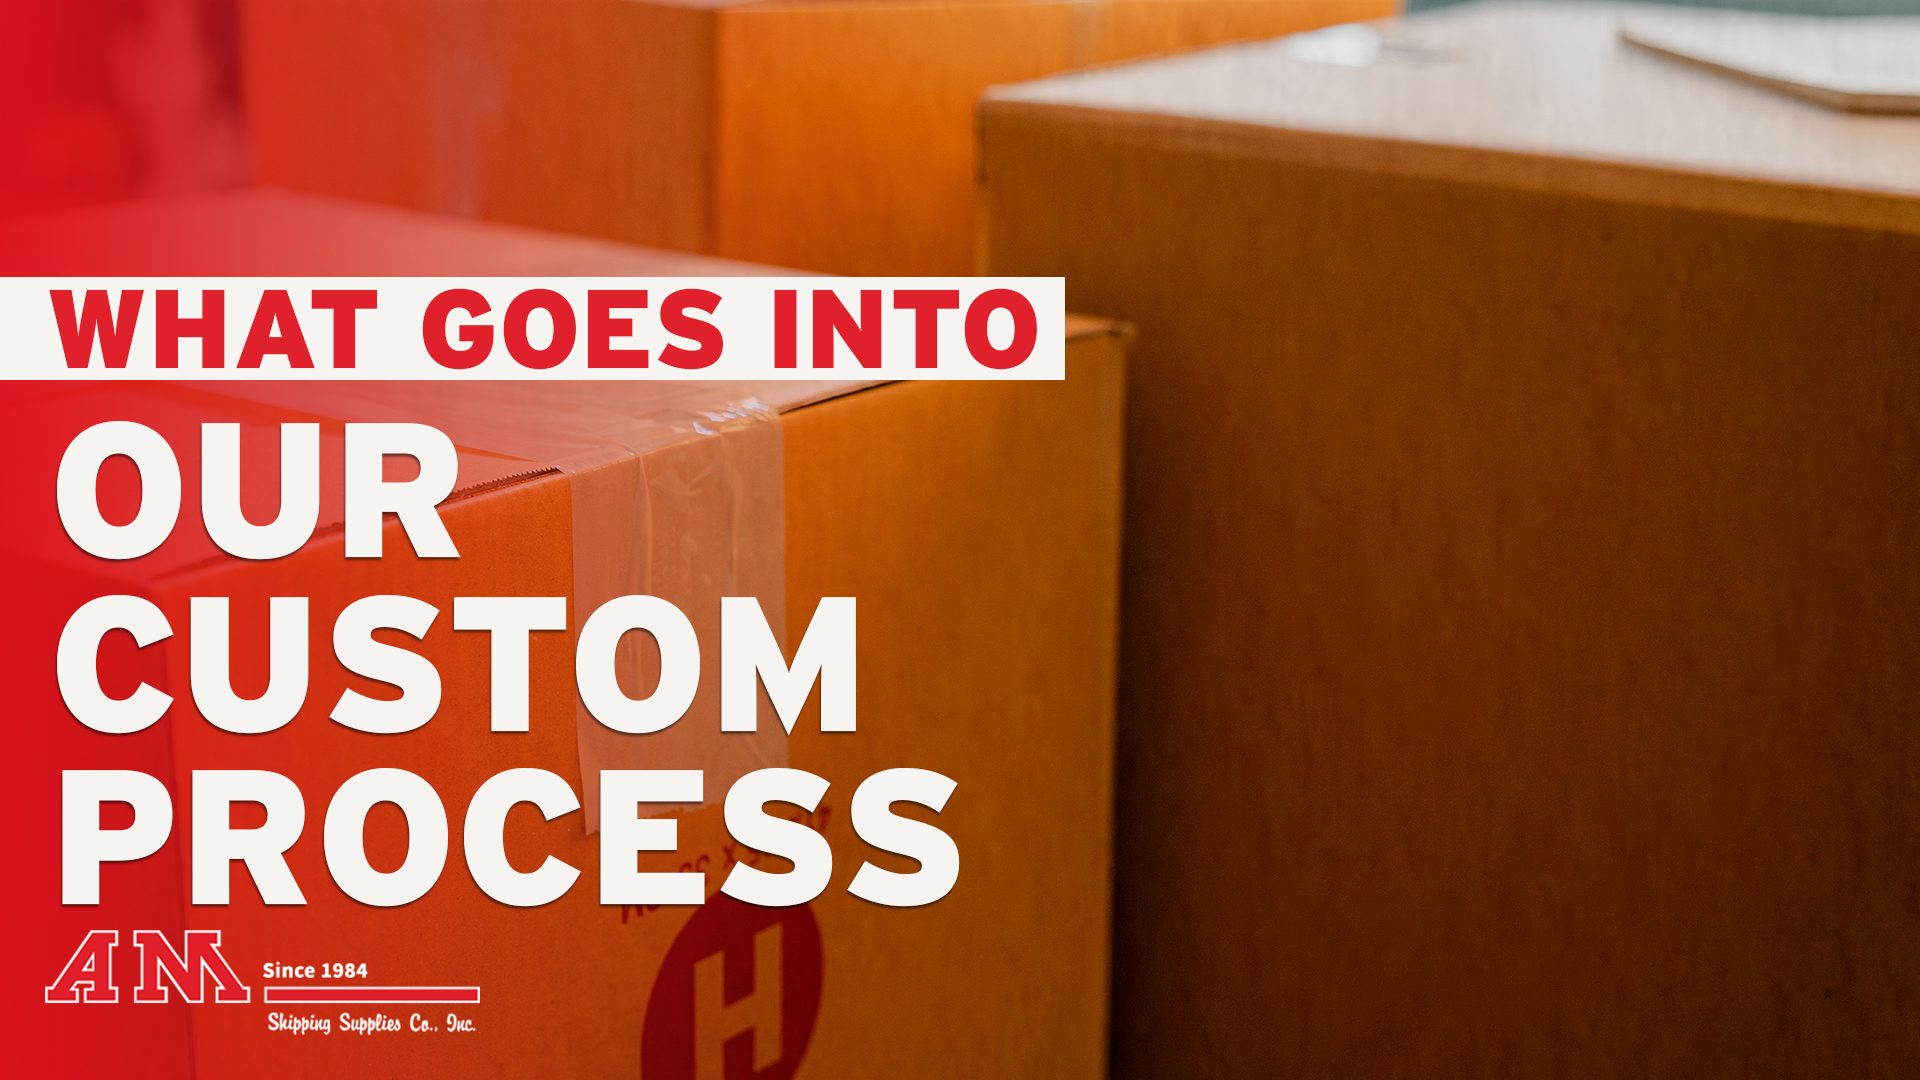 What Goes into Our Custom Process